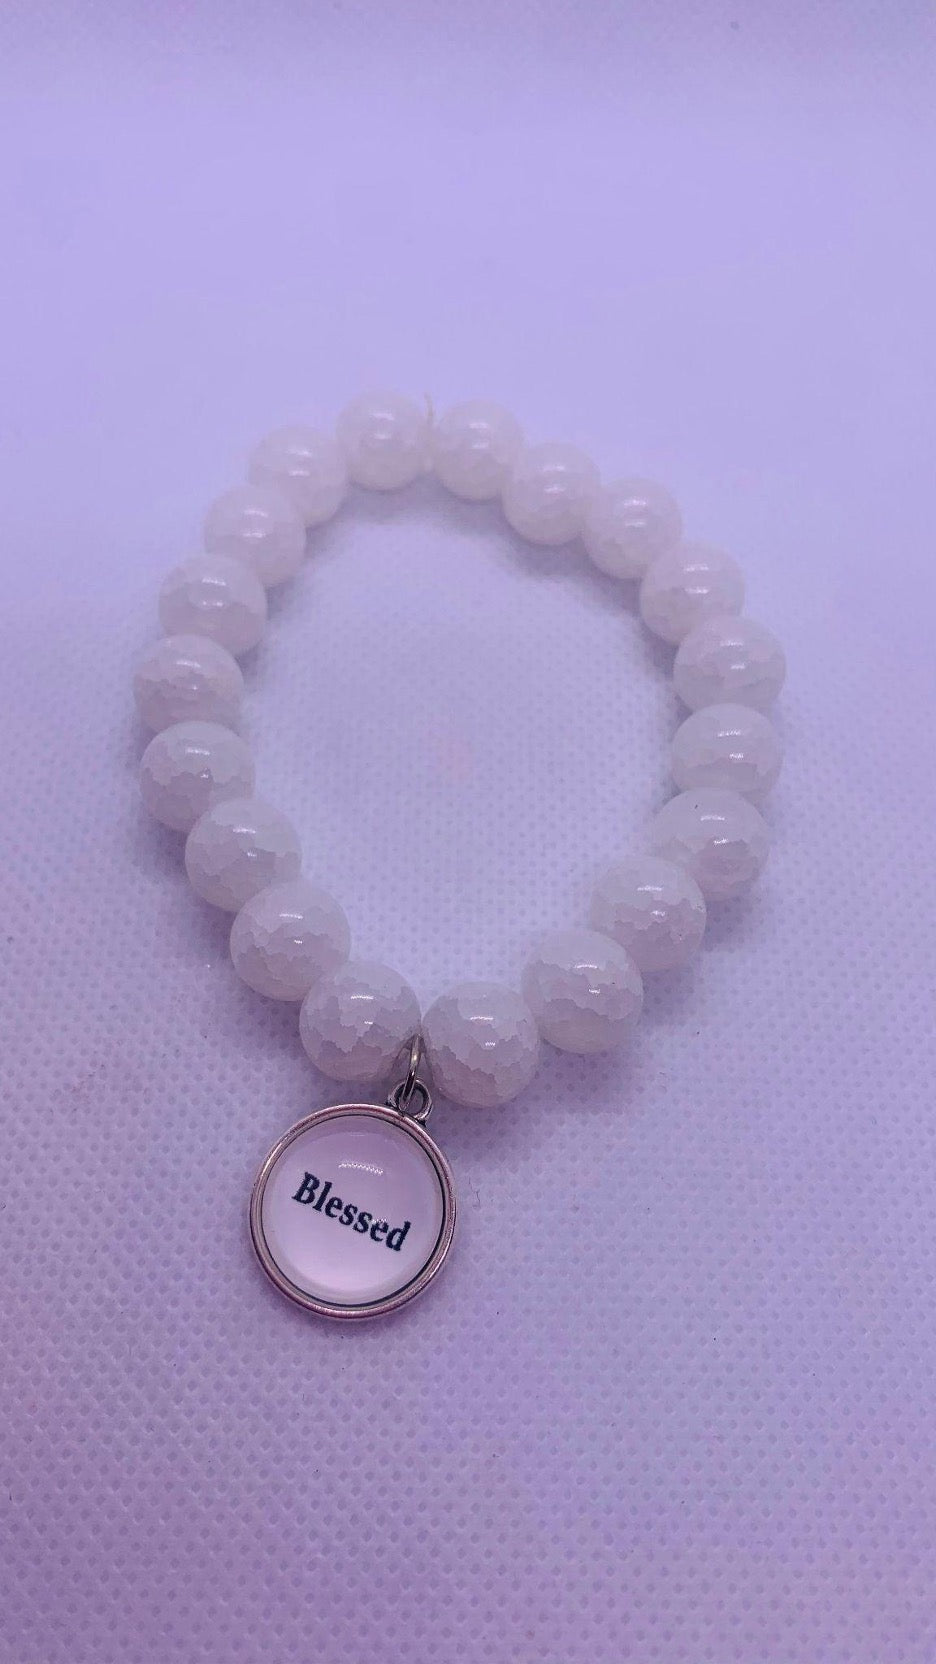 “Blessed” Charm Glass Bracelet - Cowtown Bling N Things